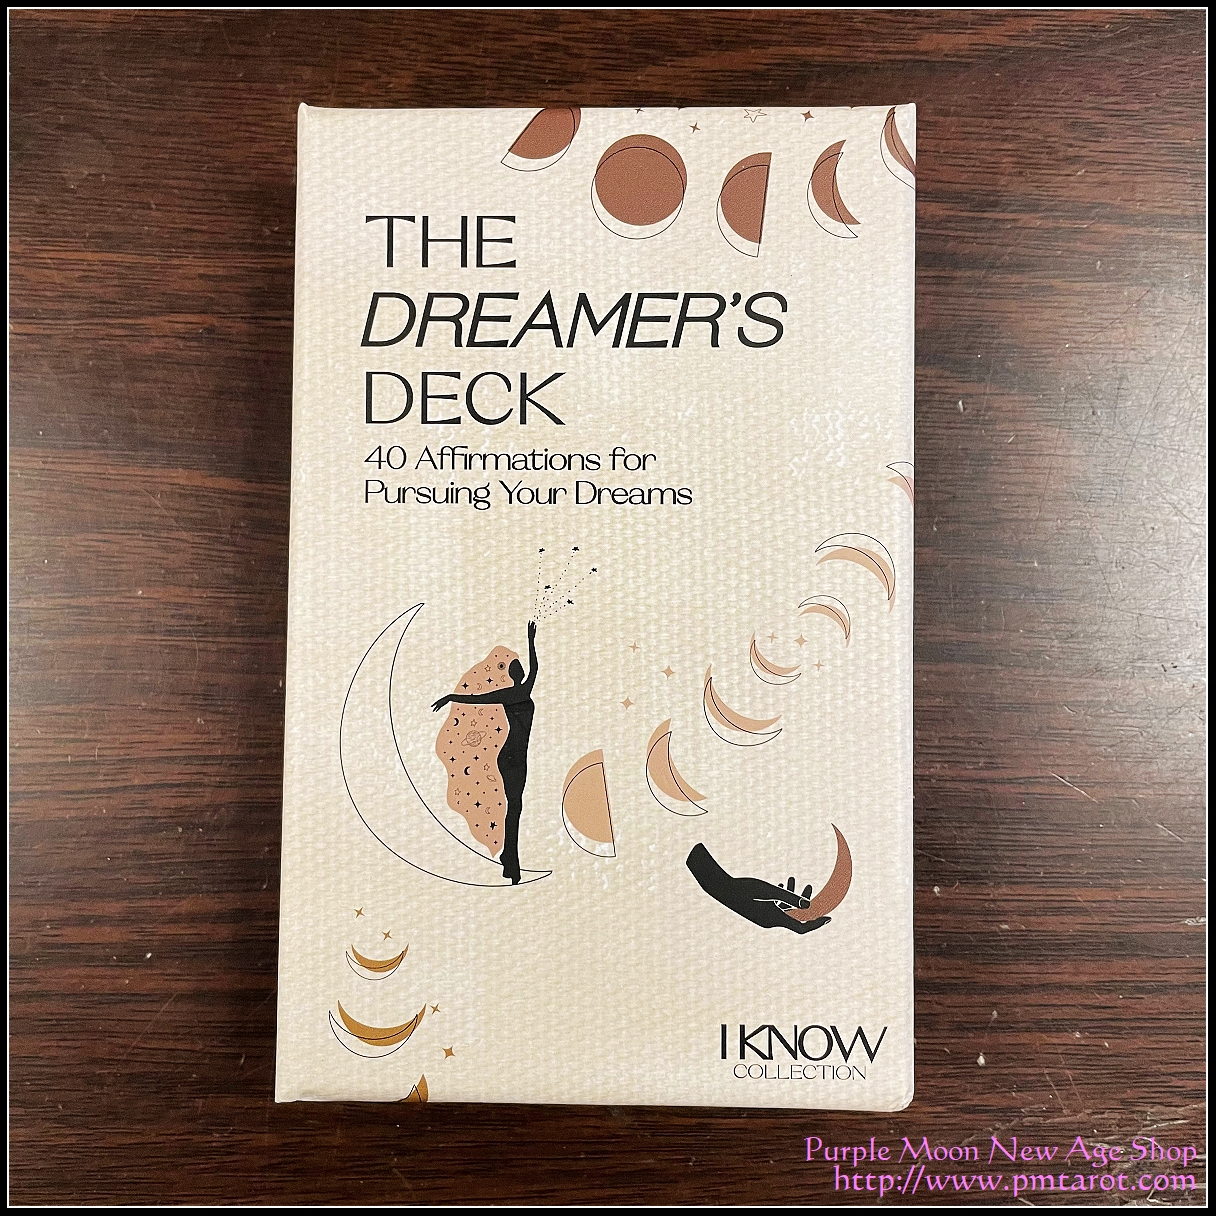 The Dreamer's Deck - 40 Affirmations for Pursuing Your Dreams